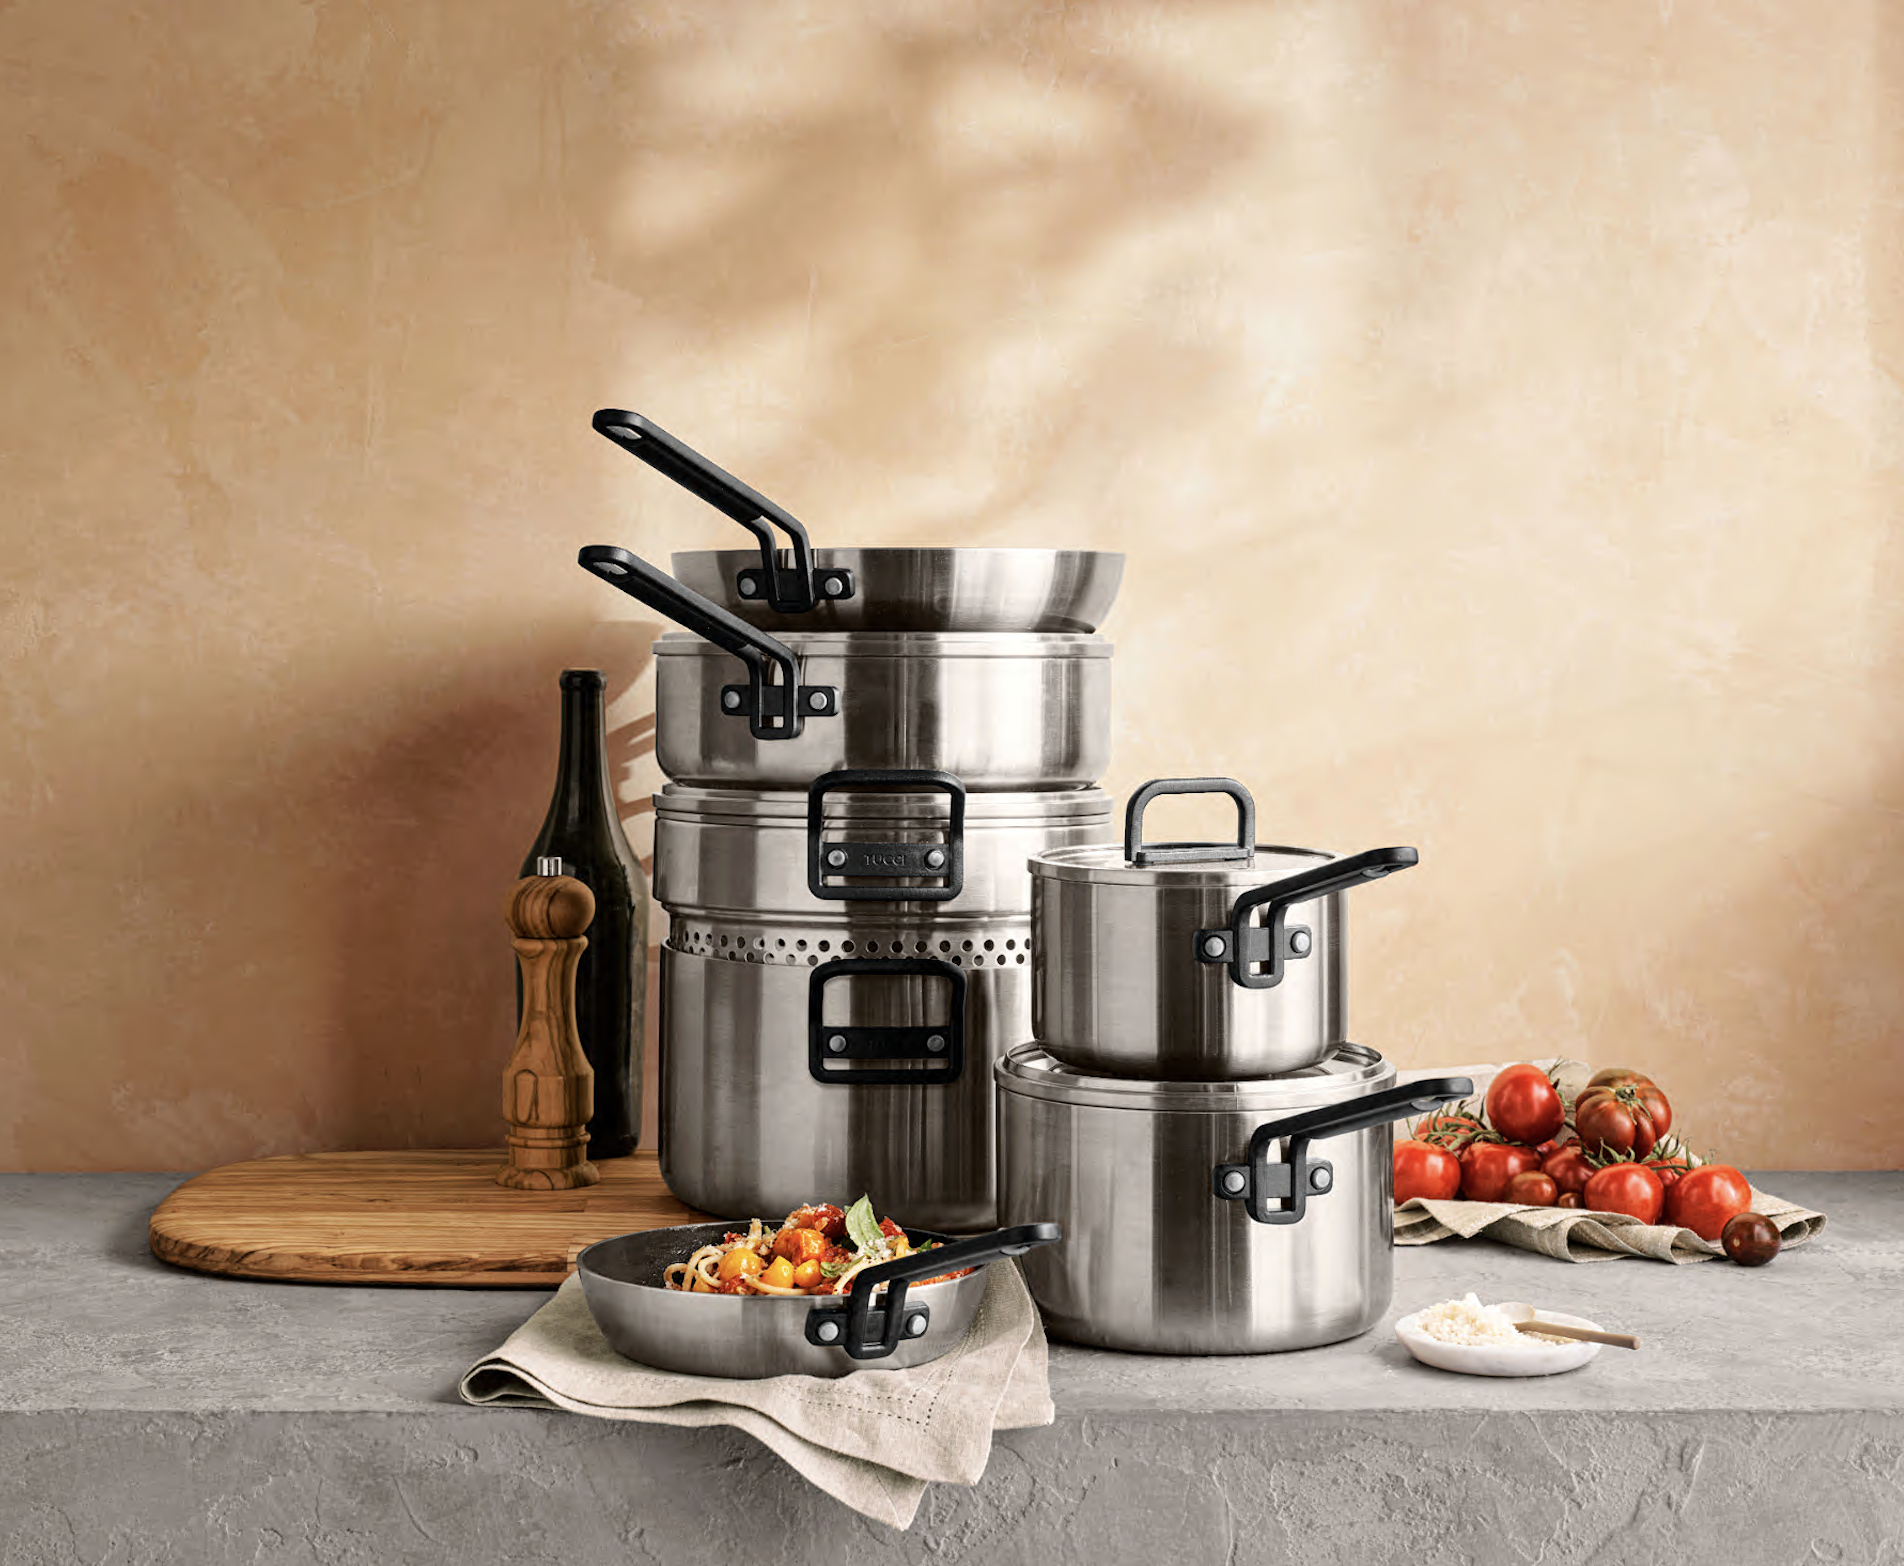 Stanley Tucci launches new cookware at Williams-Sonoma, and it's